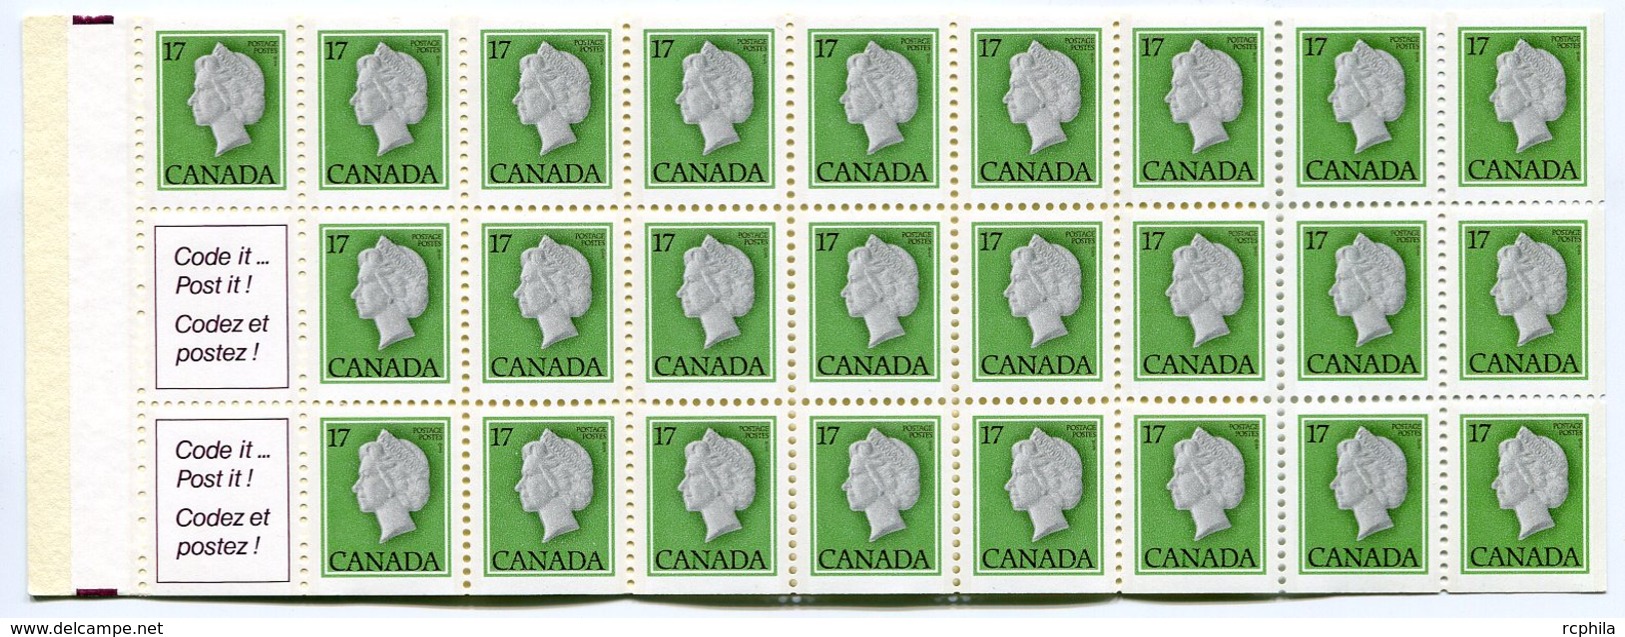 RC 15932 CANADA BK81 PARLIAMENT ISSUE CARNET COMPLET BOOKLET MNH NEUF ** - Cuadernillos Completos